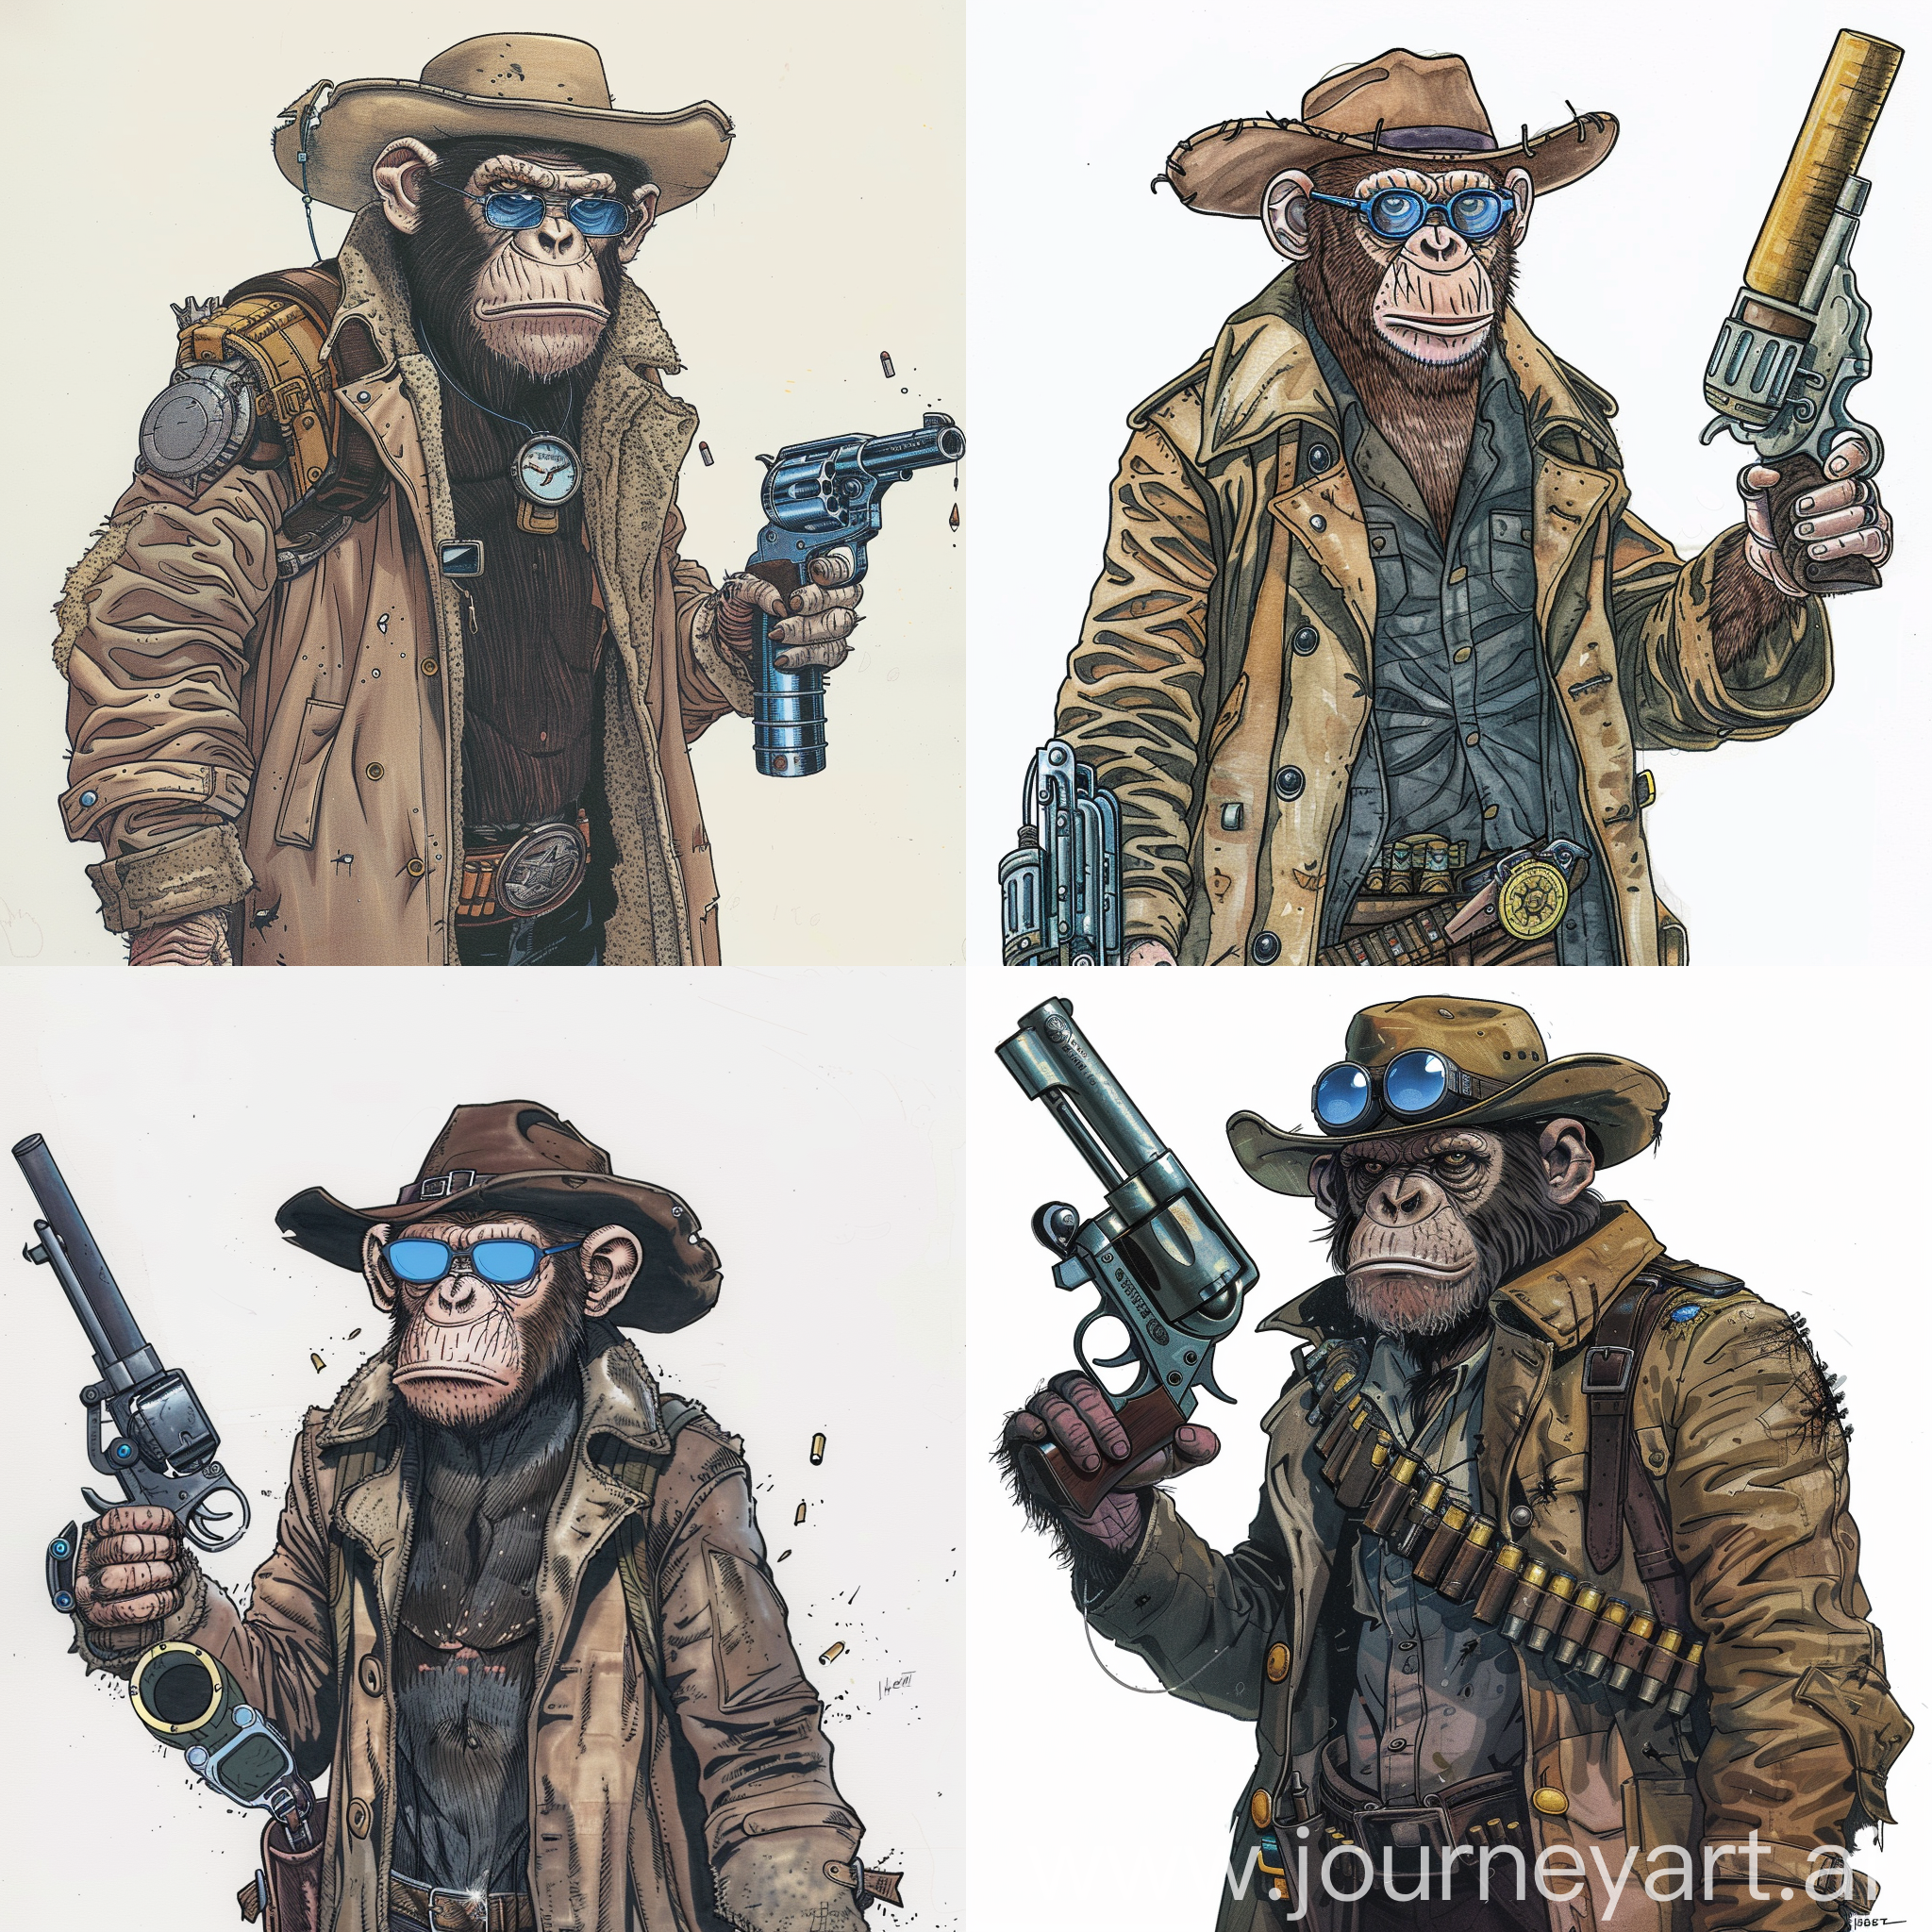 Draw an outlaw chimpanzee character wearing an old duster coat, post apocalypse, large barrel revolver, cowboy hat, male, has a robotic arm, full body drawing, Jamie Hewlett graphic novel style, white background, short in stature, has on blue spectacles, full color